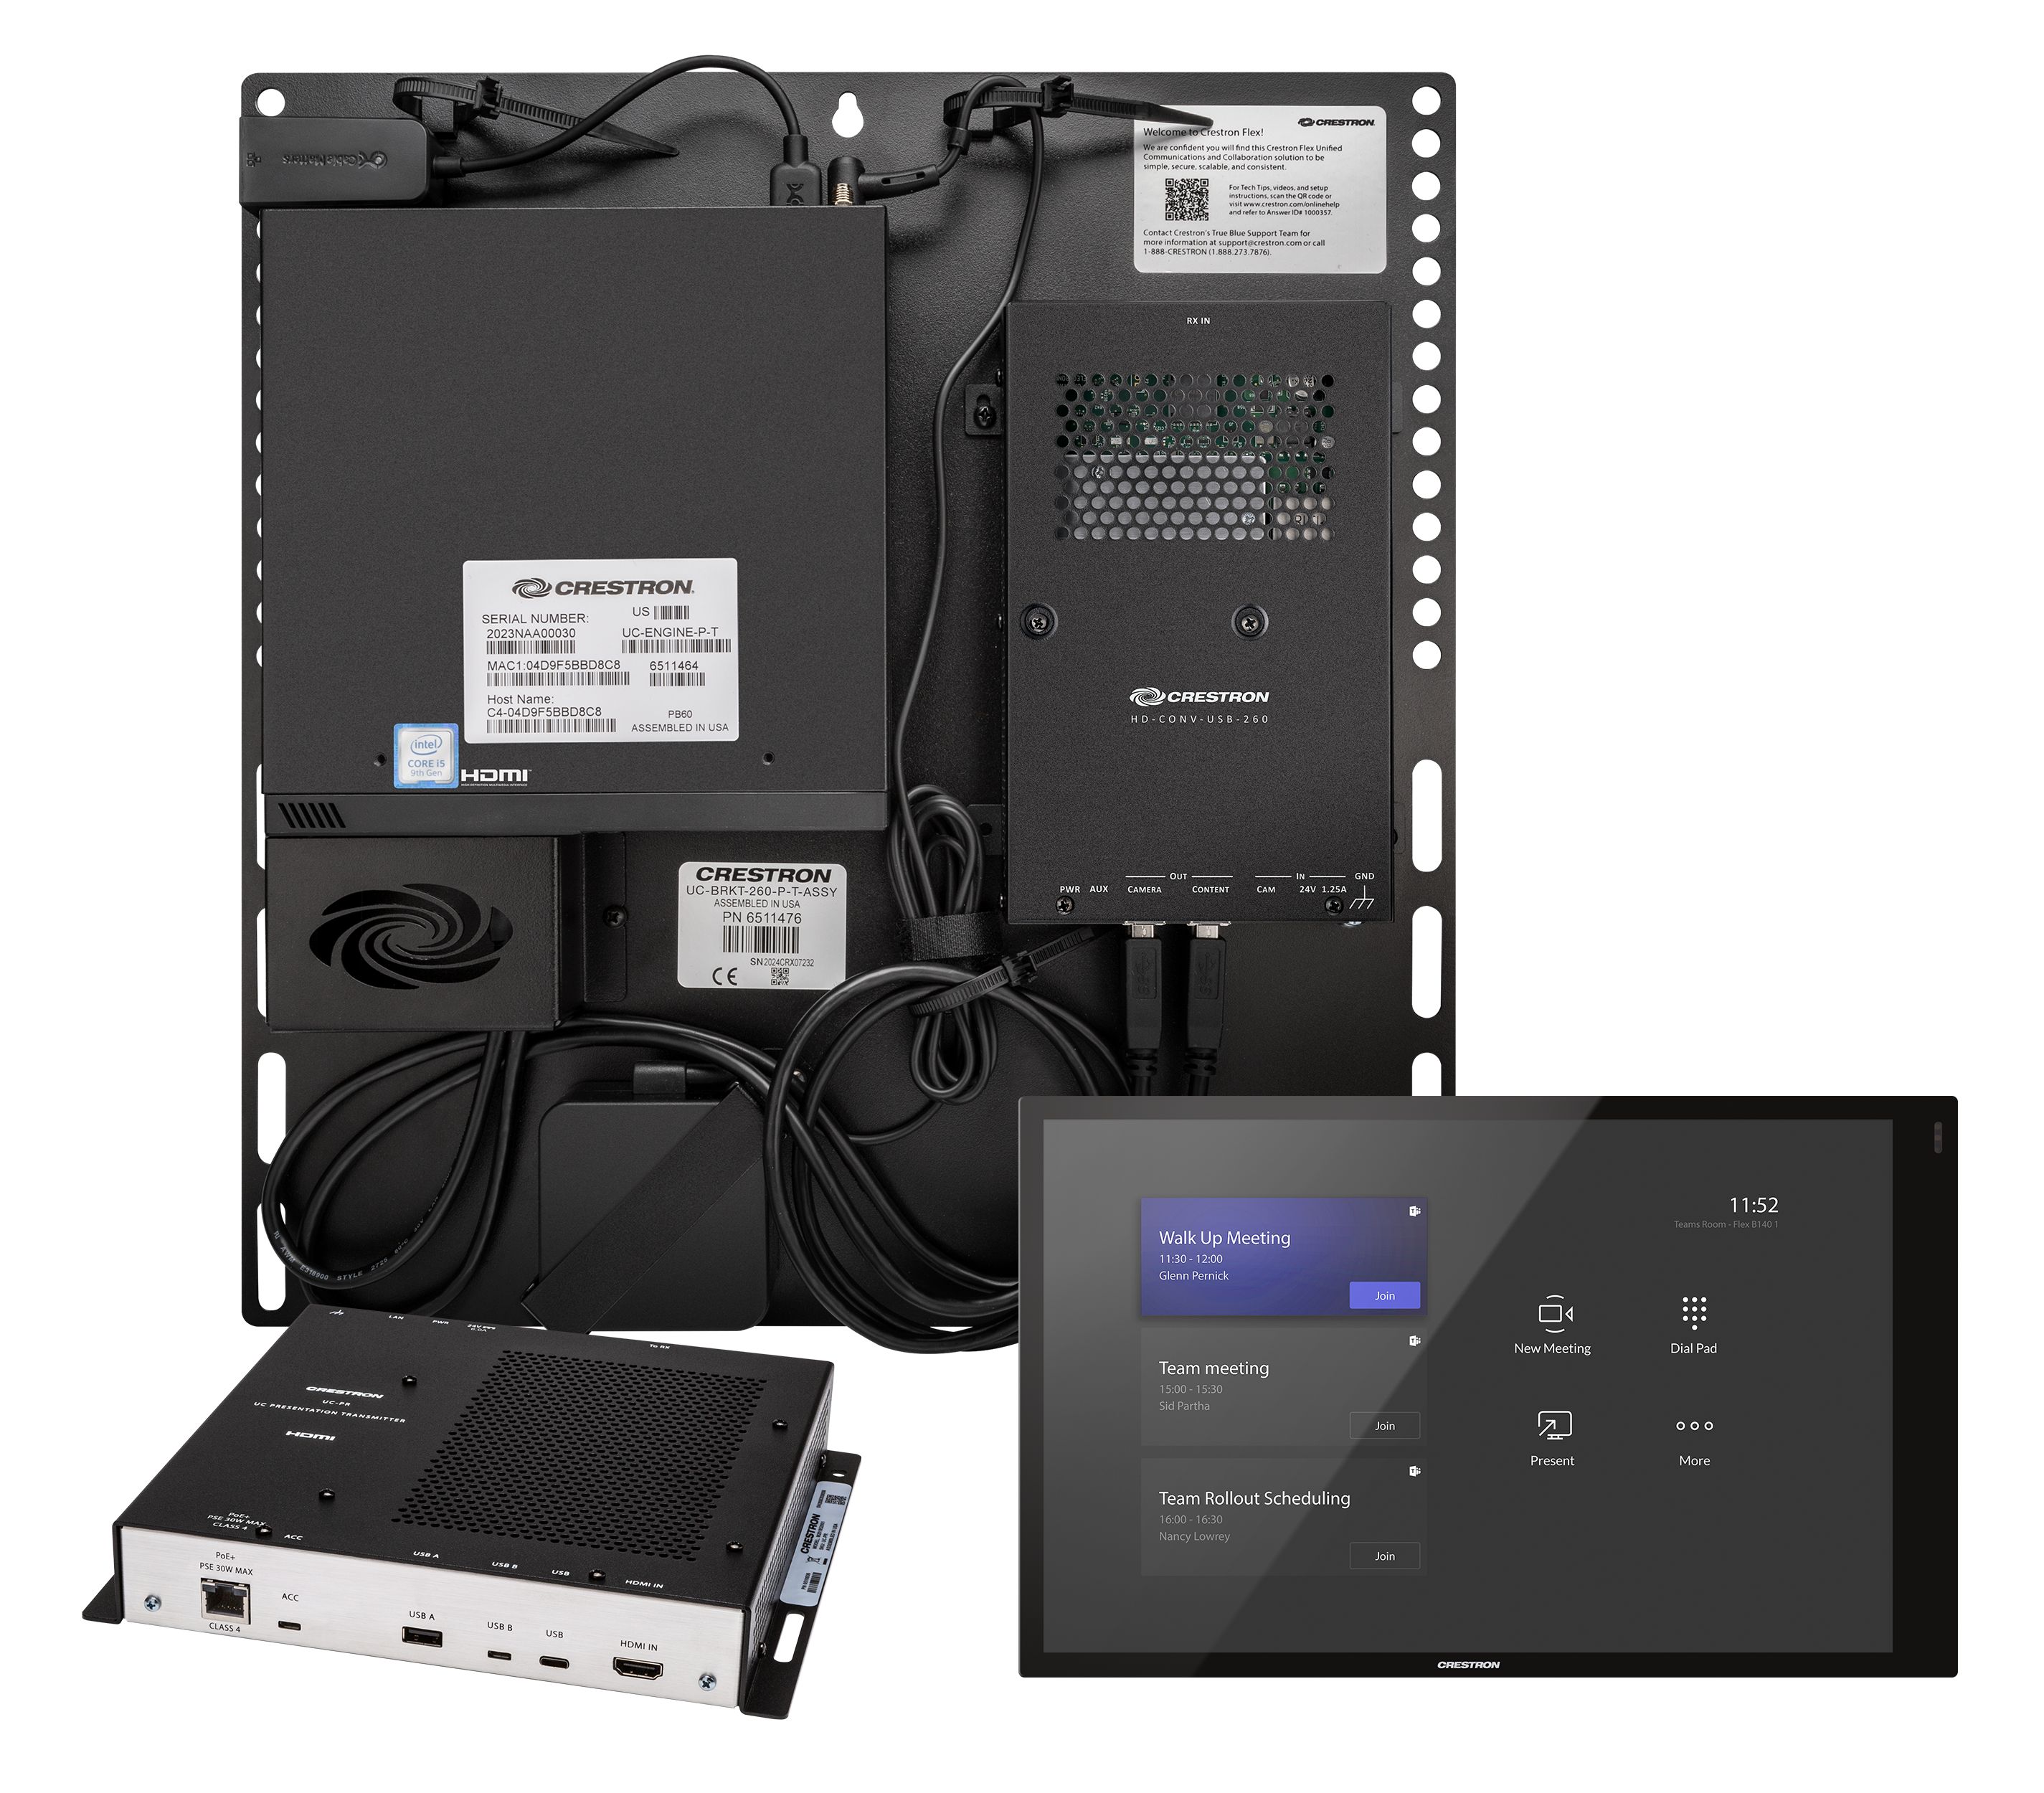 UC-CX100-T-WM Flex Advanced Video Conference System Integrator Kit with a Wall Mounted Control Interface for Microsoft Teams Rooms